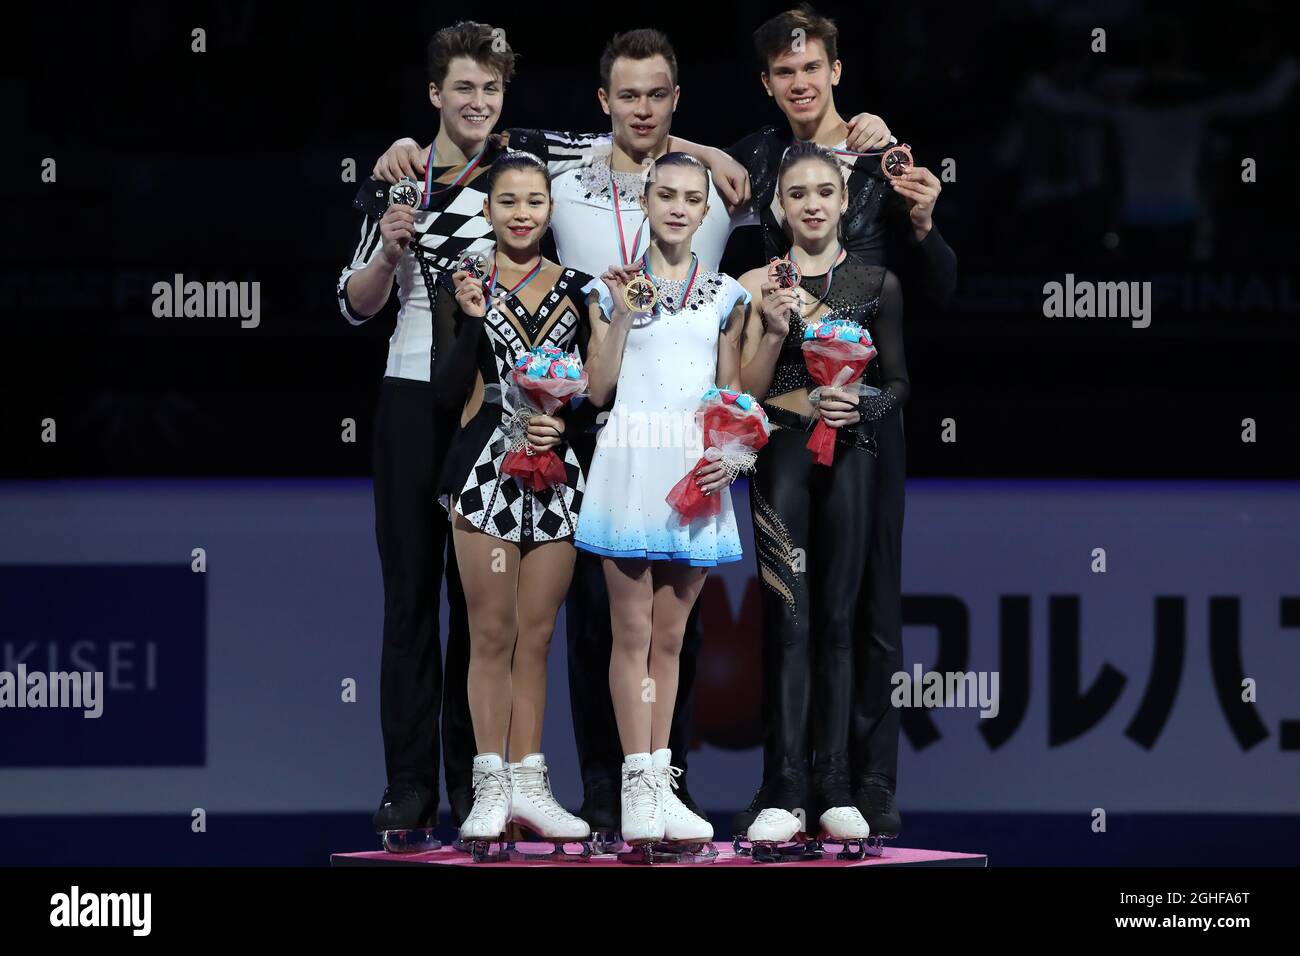 Junior Pairs' medal winners on the podium, ( L to R ), Silver medalists Diana Mukhametzianova and Ilya Mironov of Russia, Gold medalists Apollinariia Panfilova and Dmitry Rylov of Russia and Bronze medalists Kseniia Akhnateva and Valerii Kolesov of Russia at Palavela, Turin. Picture date: 7th December 2019. Picture credit should read: Jonathan Moscrop/Sportimage via PA Images Stock Photo